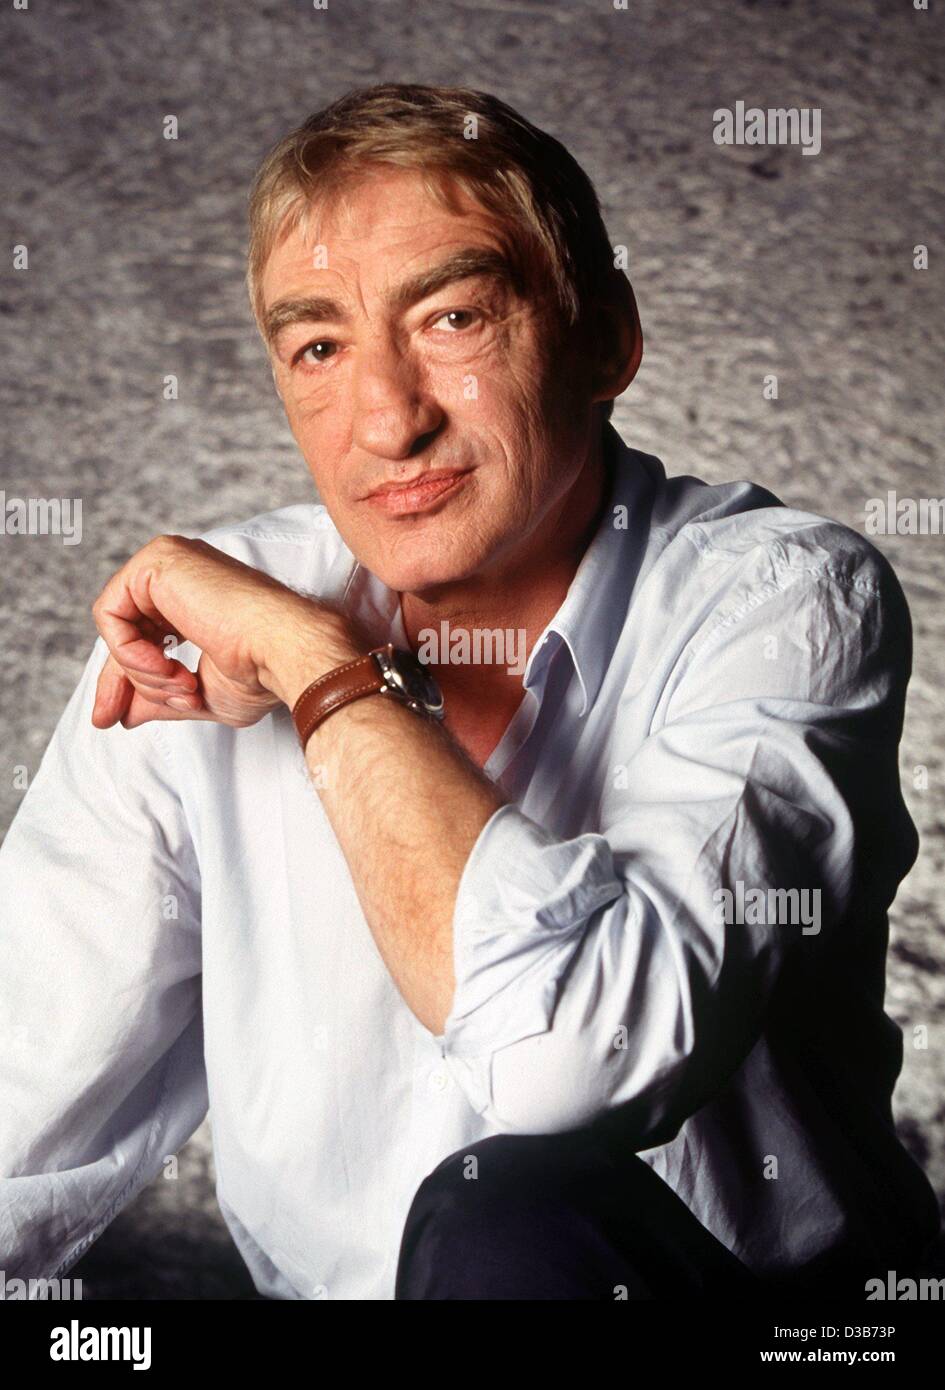 (dpa files) - A file picture shows German actor Gottfried John in Mainz, Germany, February 2000. After beginning his career in the theatre, John became famous with Fassbinder's films 'Berlin Alexanderplatz' (1980) and 'The Marriage of Maria Braun' (1979). He also played the villain in 'James Bond -  Stock Photo